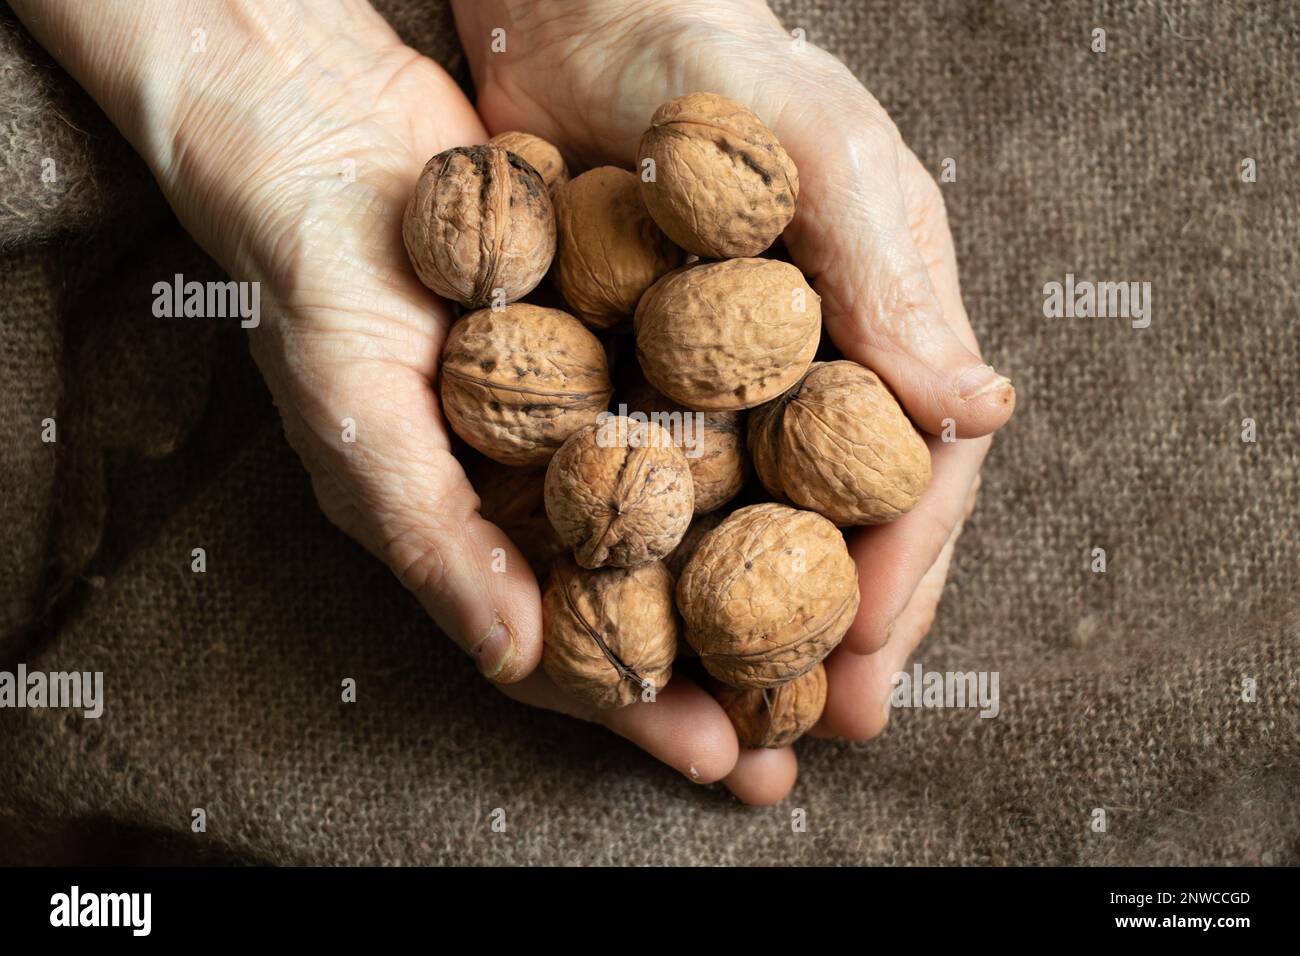 old woman holding a lot of walnuts in her hands at home on the background of a brown shawl, nuts in grandmother's hands, healthy food, vegan food Stock Photo